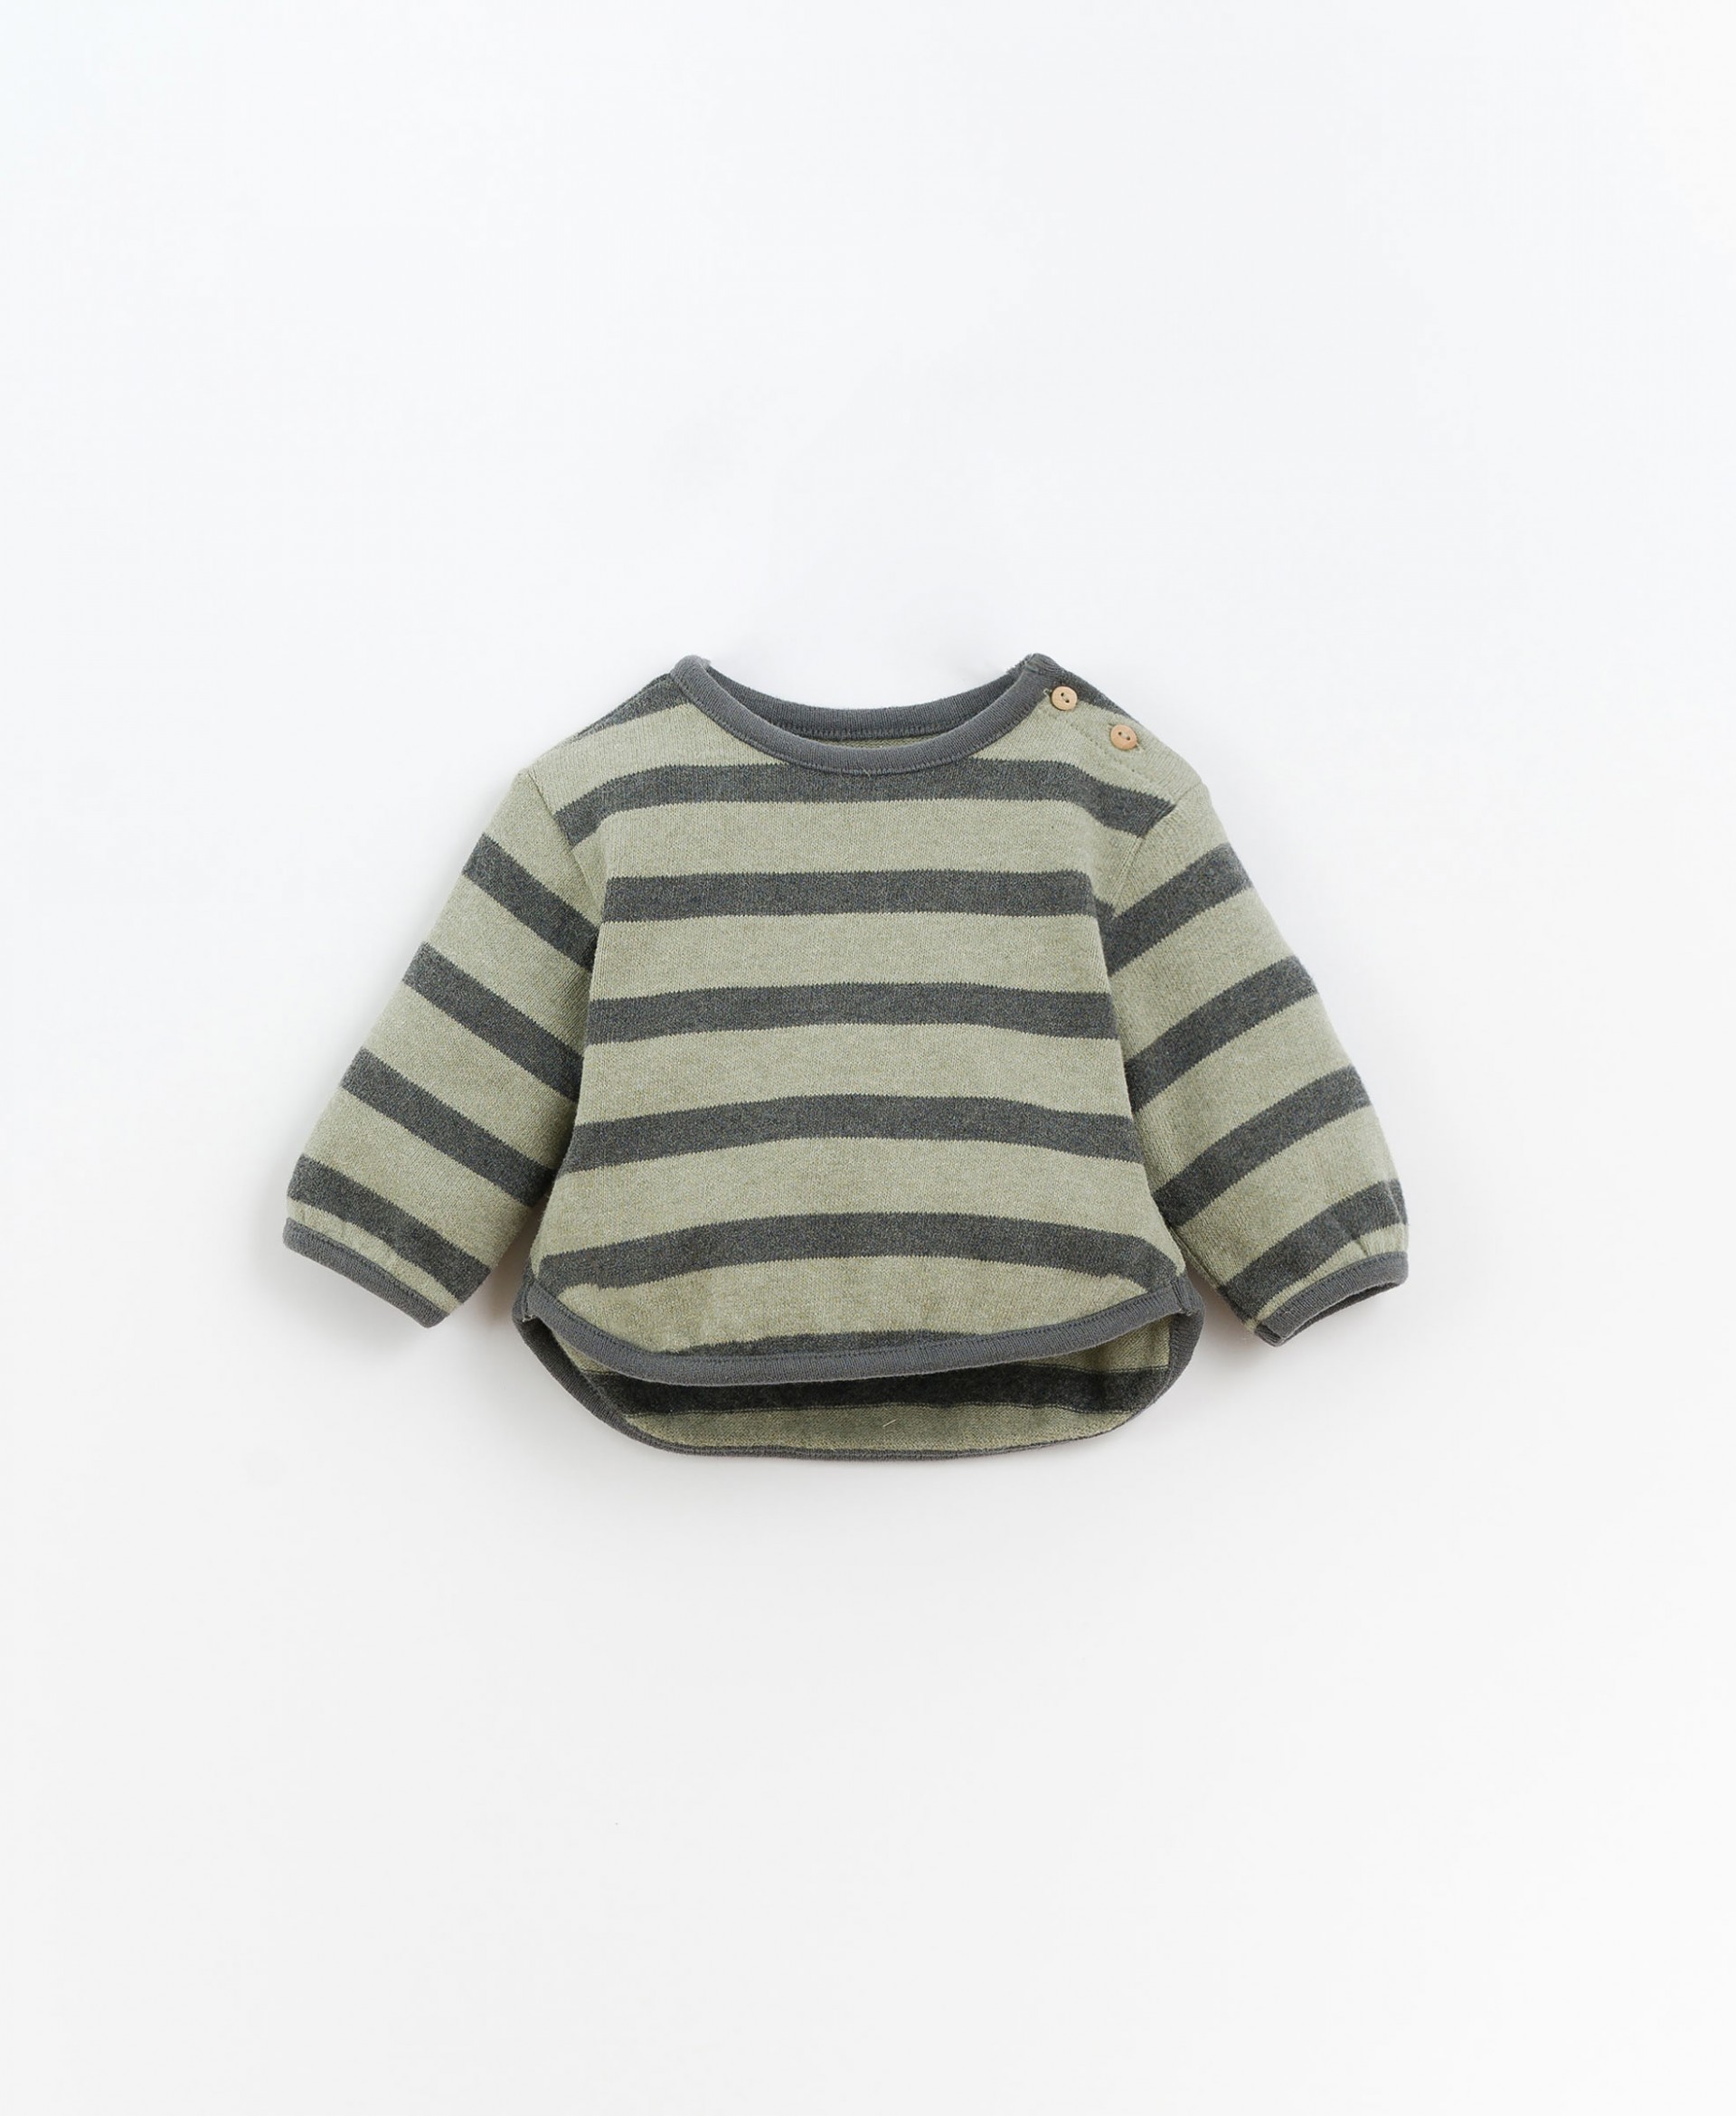 Woven striped jersey | Culinary